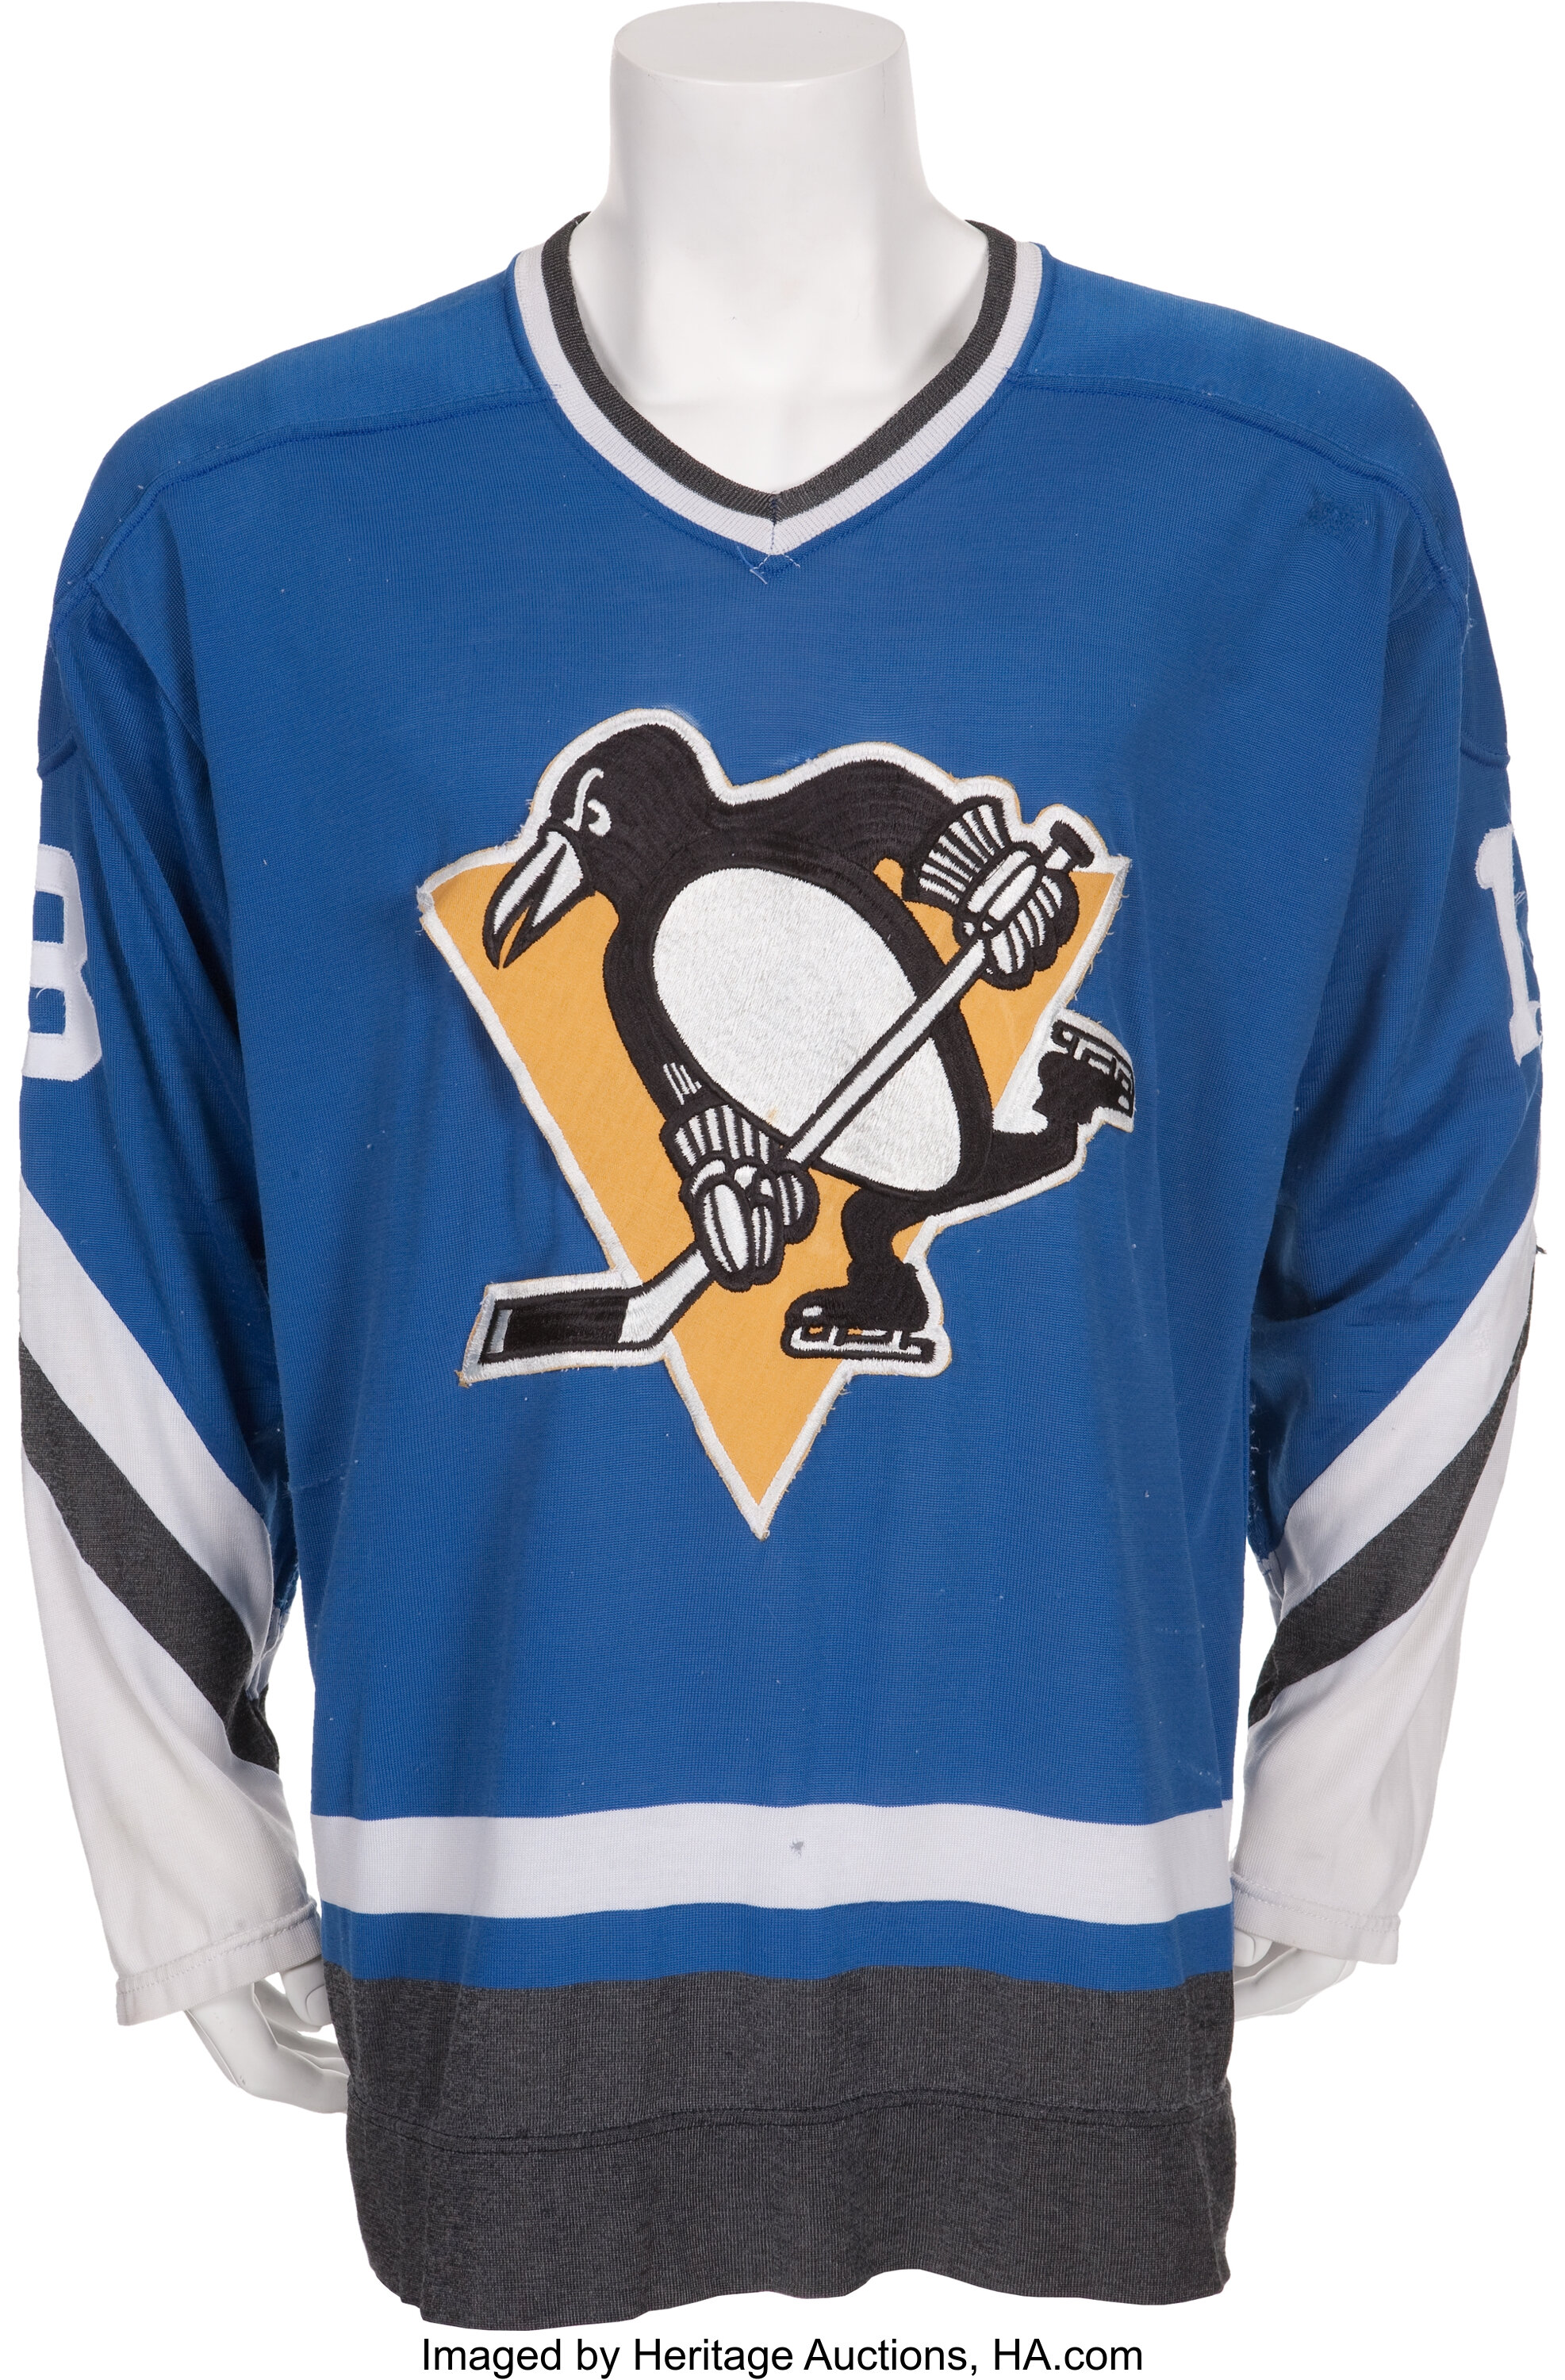 Penguins' New Jerseys: 5 Things You Need To Know